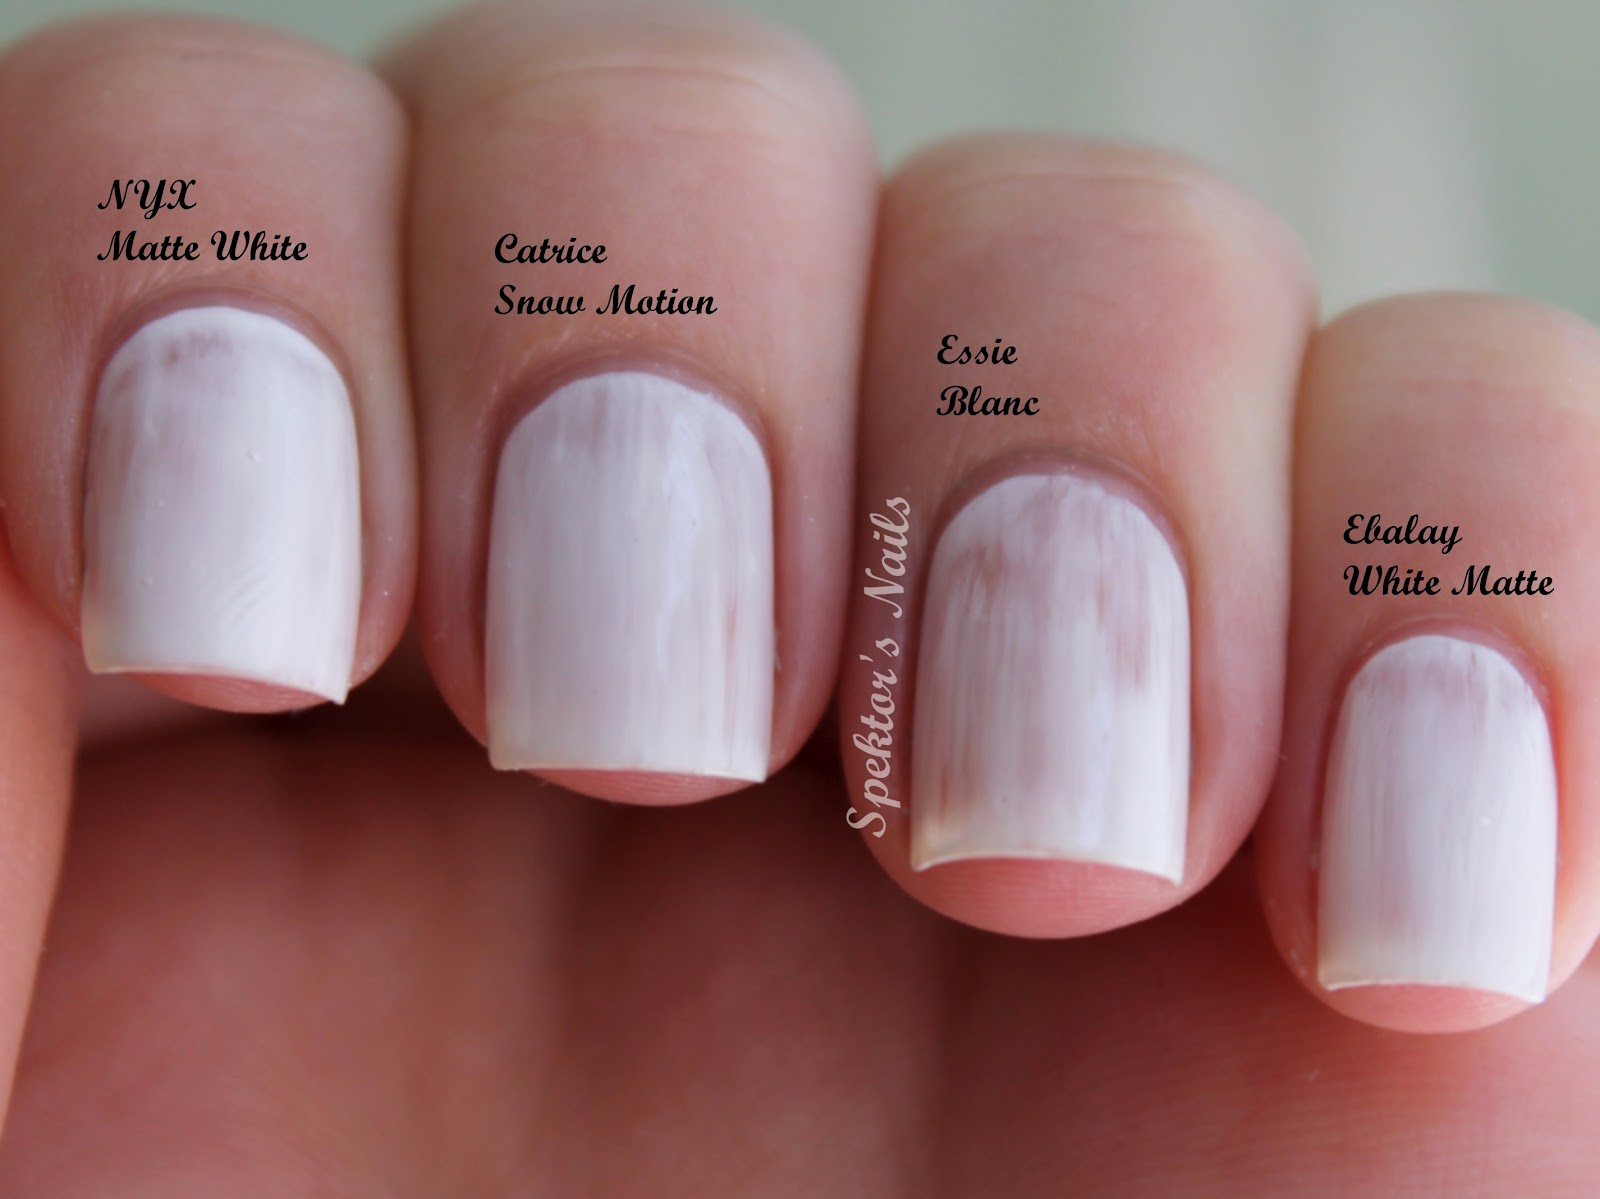 White Nail Polish Color Meaning: What Does it Symbolize? - wide 5